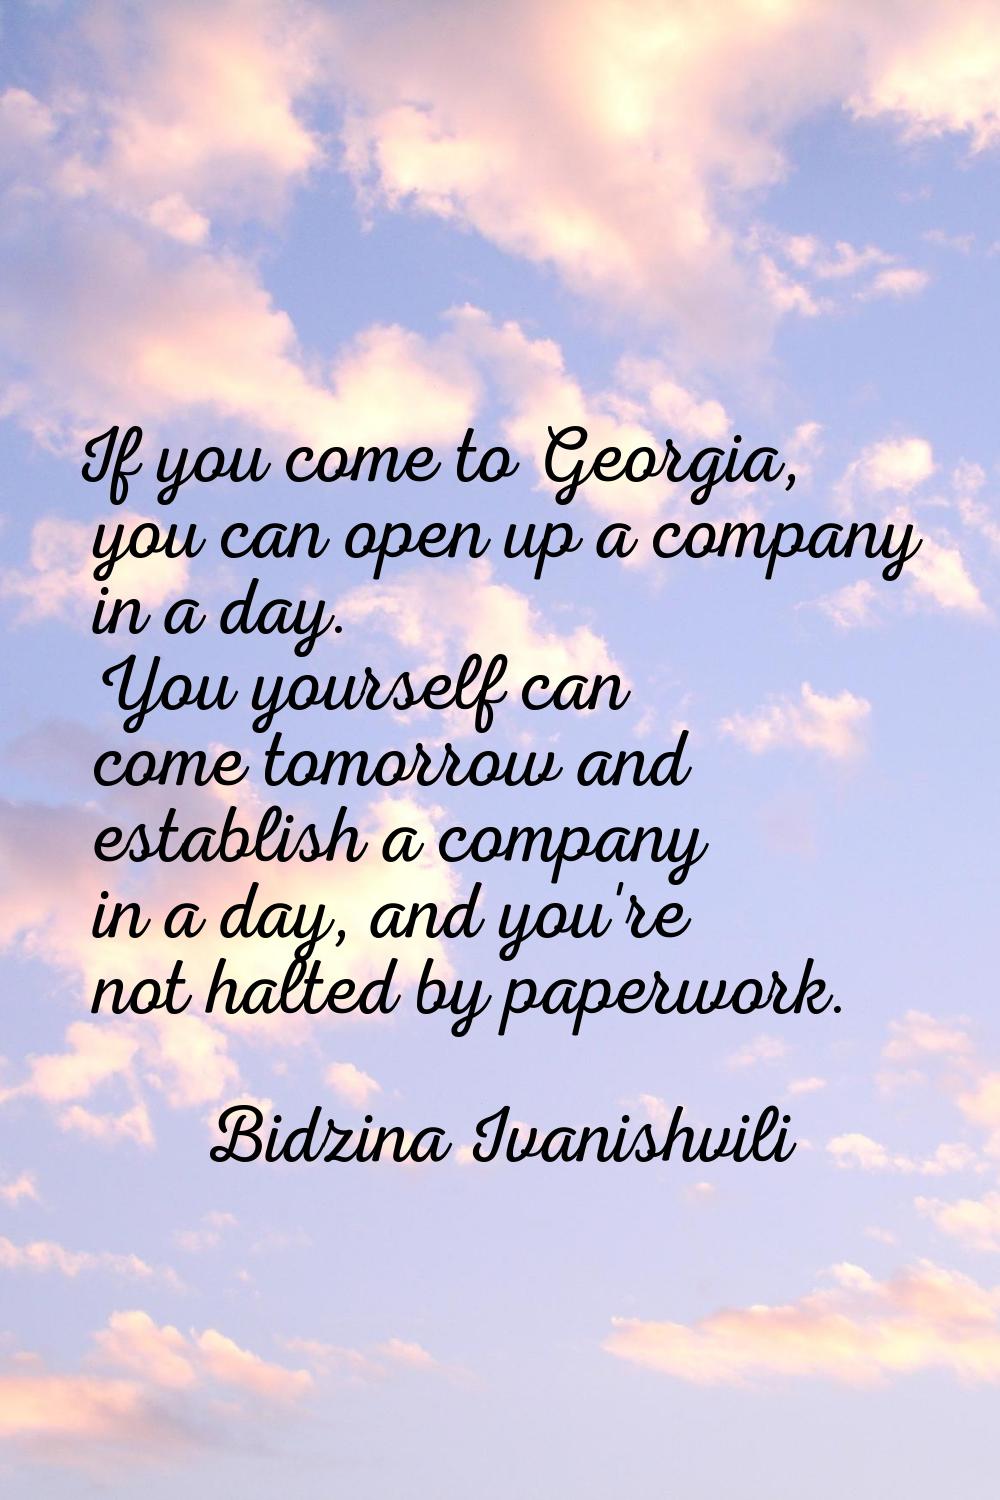 If you come to Georgia, you can open up a company in a day. You yourself can come tomorrow and esta